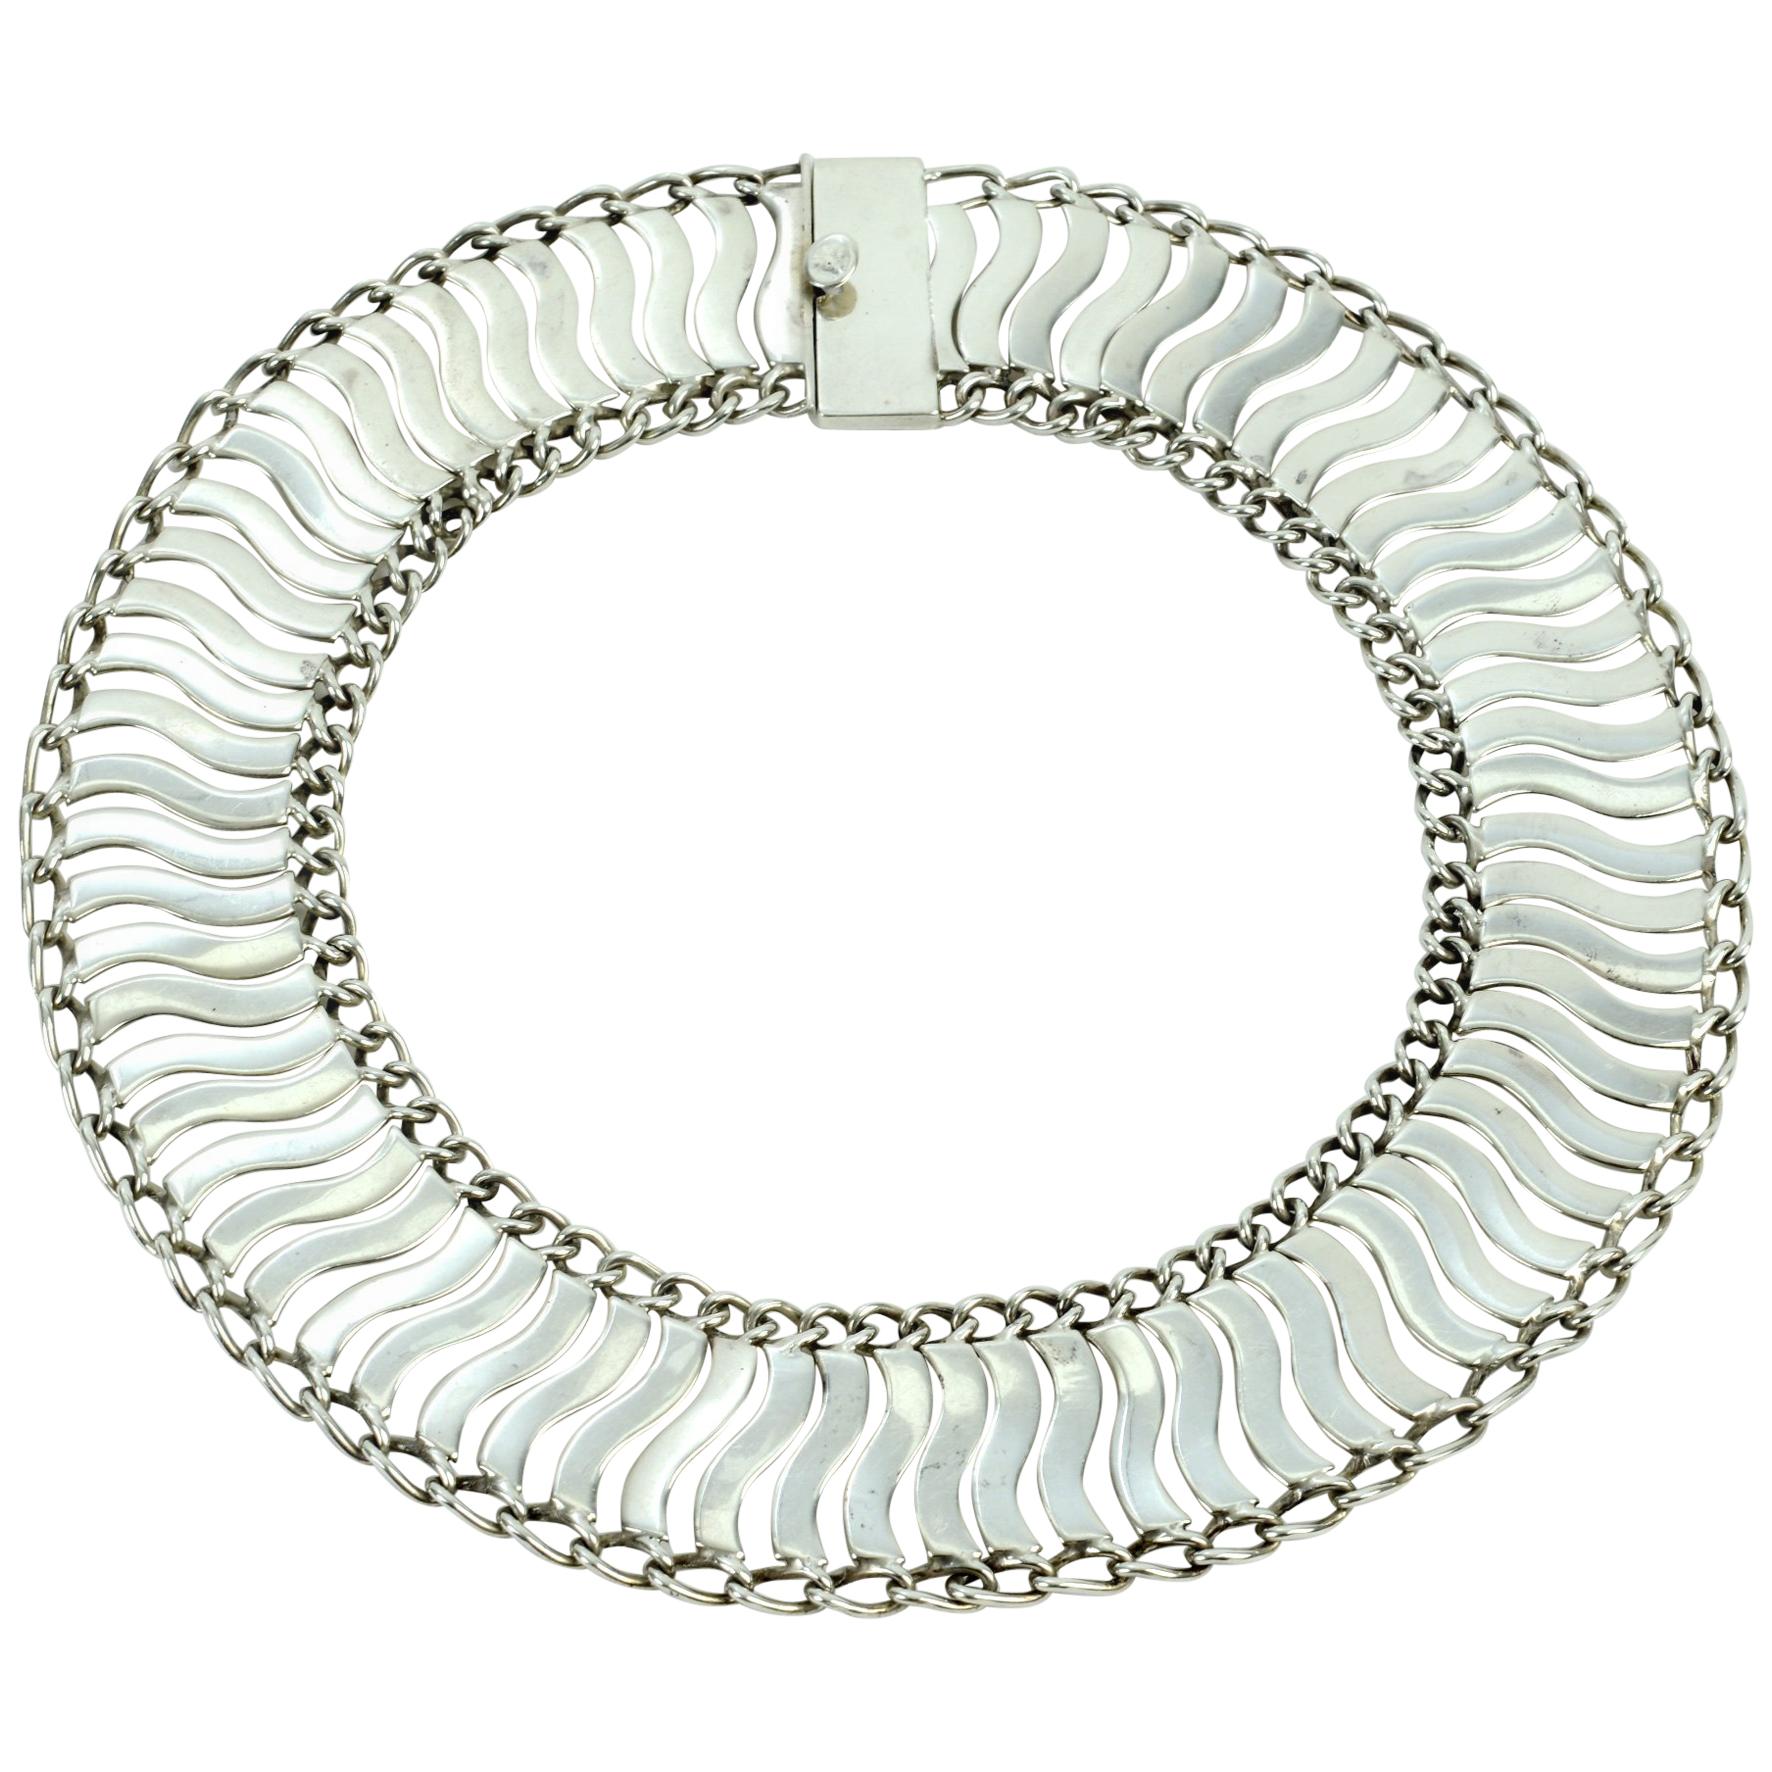 Mexican Sterling Silver Linked Wave Necklace by Plateria Farfan, circa 1950